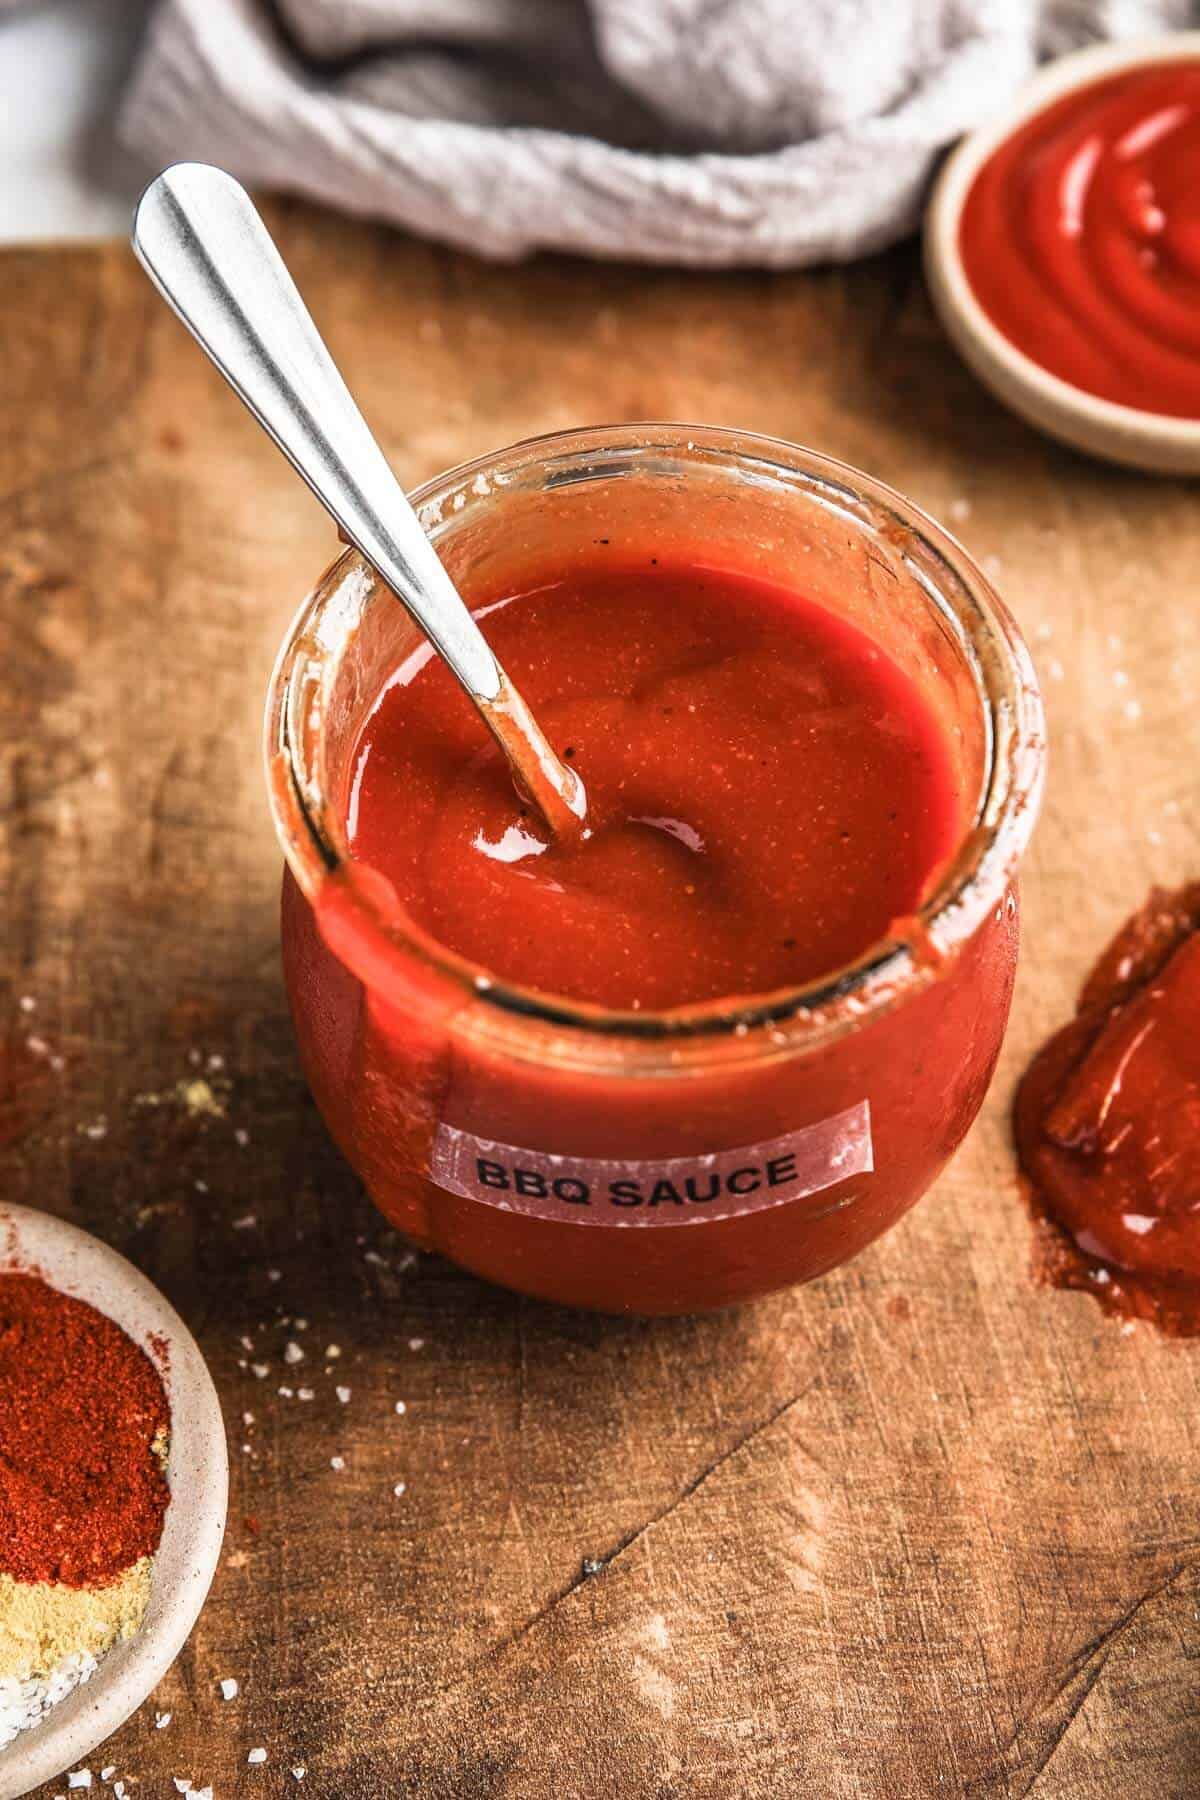 a small glass jar labeled "bbq sauce" with a silver spoon resting inside